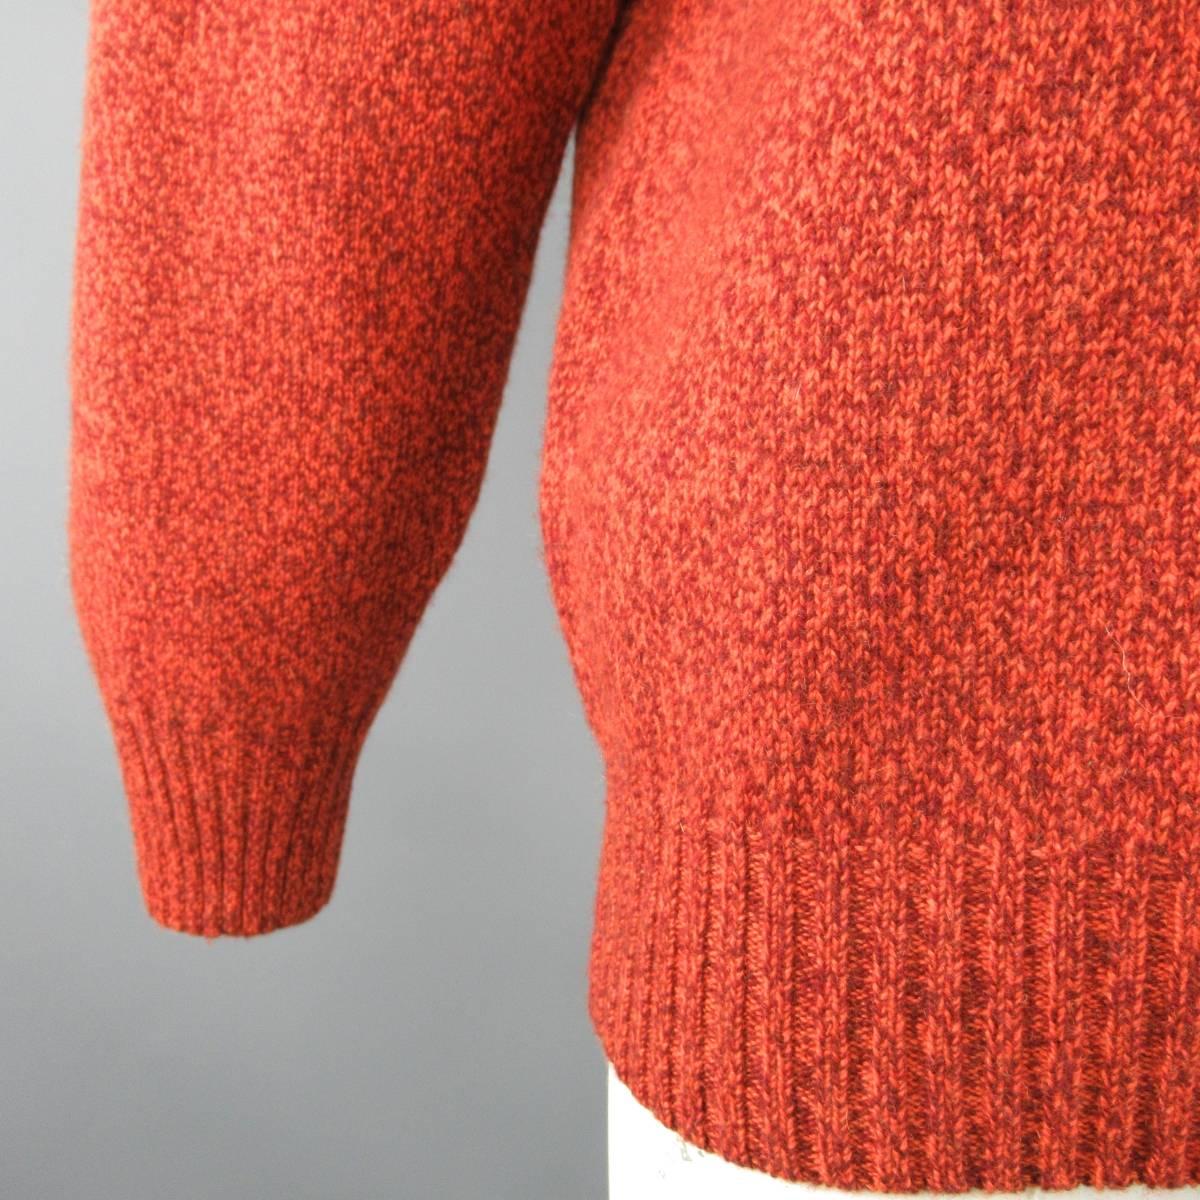 LORO PIANA crewneck pullover sweater comes in a brick red Heather texture cashmere knit with ribbed waistband and cuffs. Made in Italy.
 
New With Tags.
Marked: 52
 
Measurements:
 
Shoulder: 21 in.
Chest: 50 in.
Sleeve: 25 in.
Length: 29 in.

SKU: